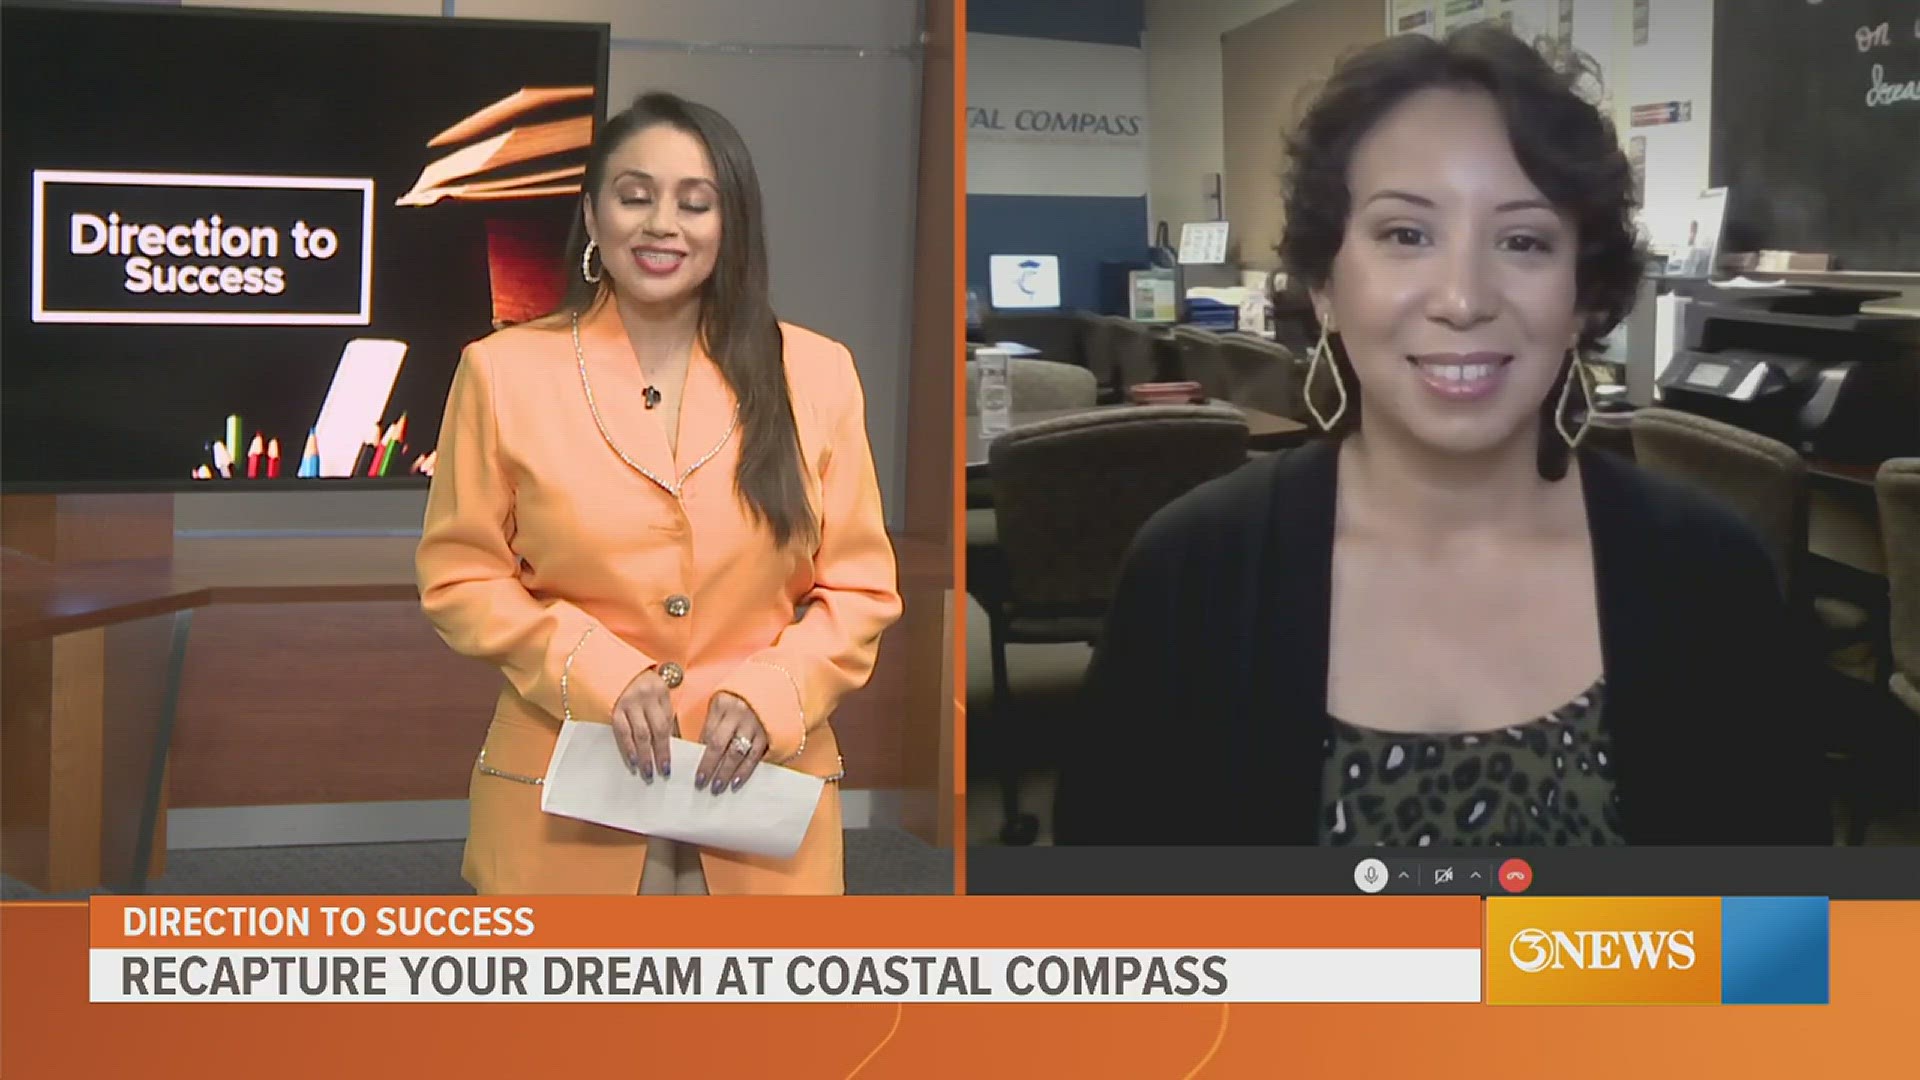 Coastal Compass can help fast track your career into a high paying job in a high demand field as well as provide assistance with overcoming financial obstacles.